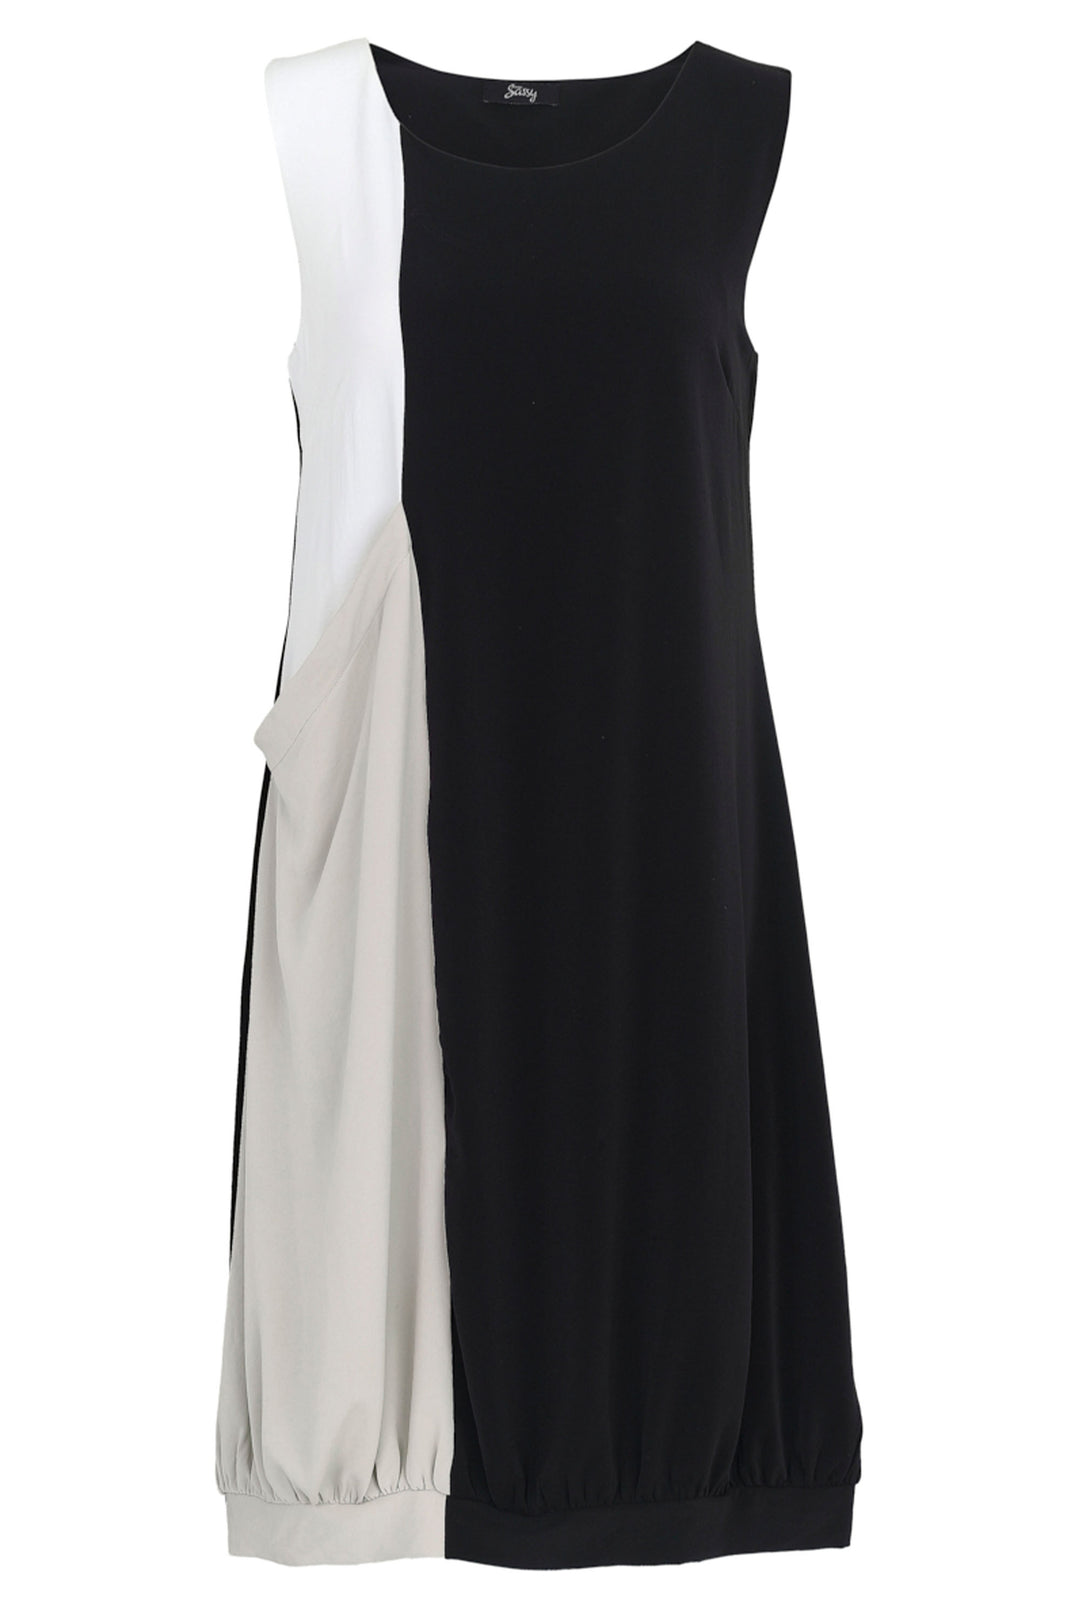 Ever Sassy Spring 2024 rafted from stretchy fabric with a classic roundneck, gathered hemline and a touch of white for some variety, this sleeveless dress is perfect for any summer occasion. 